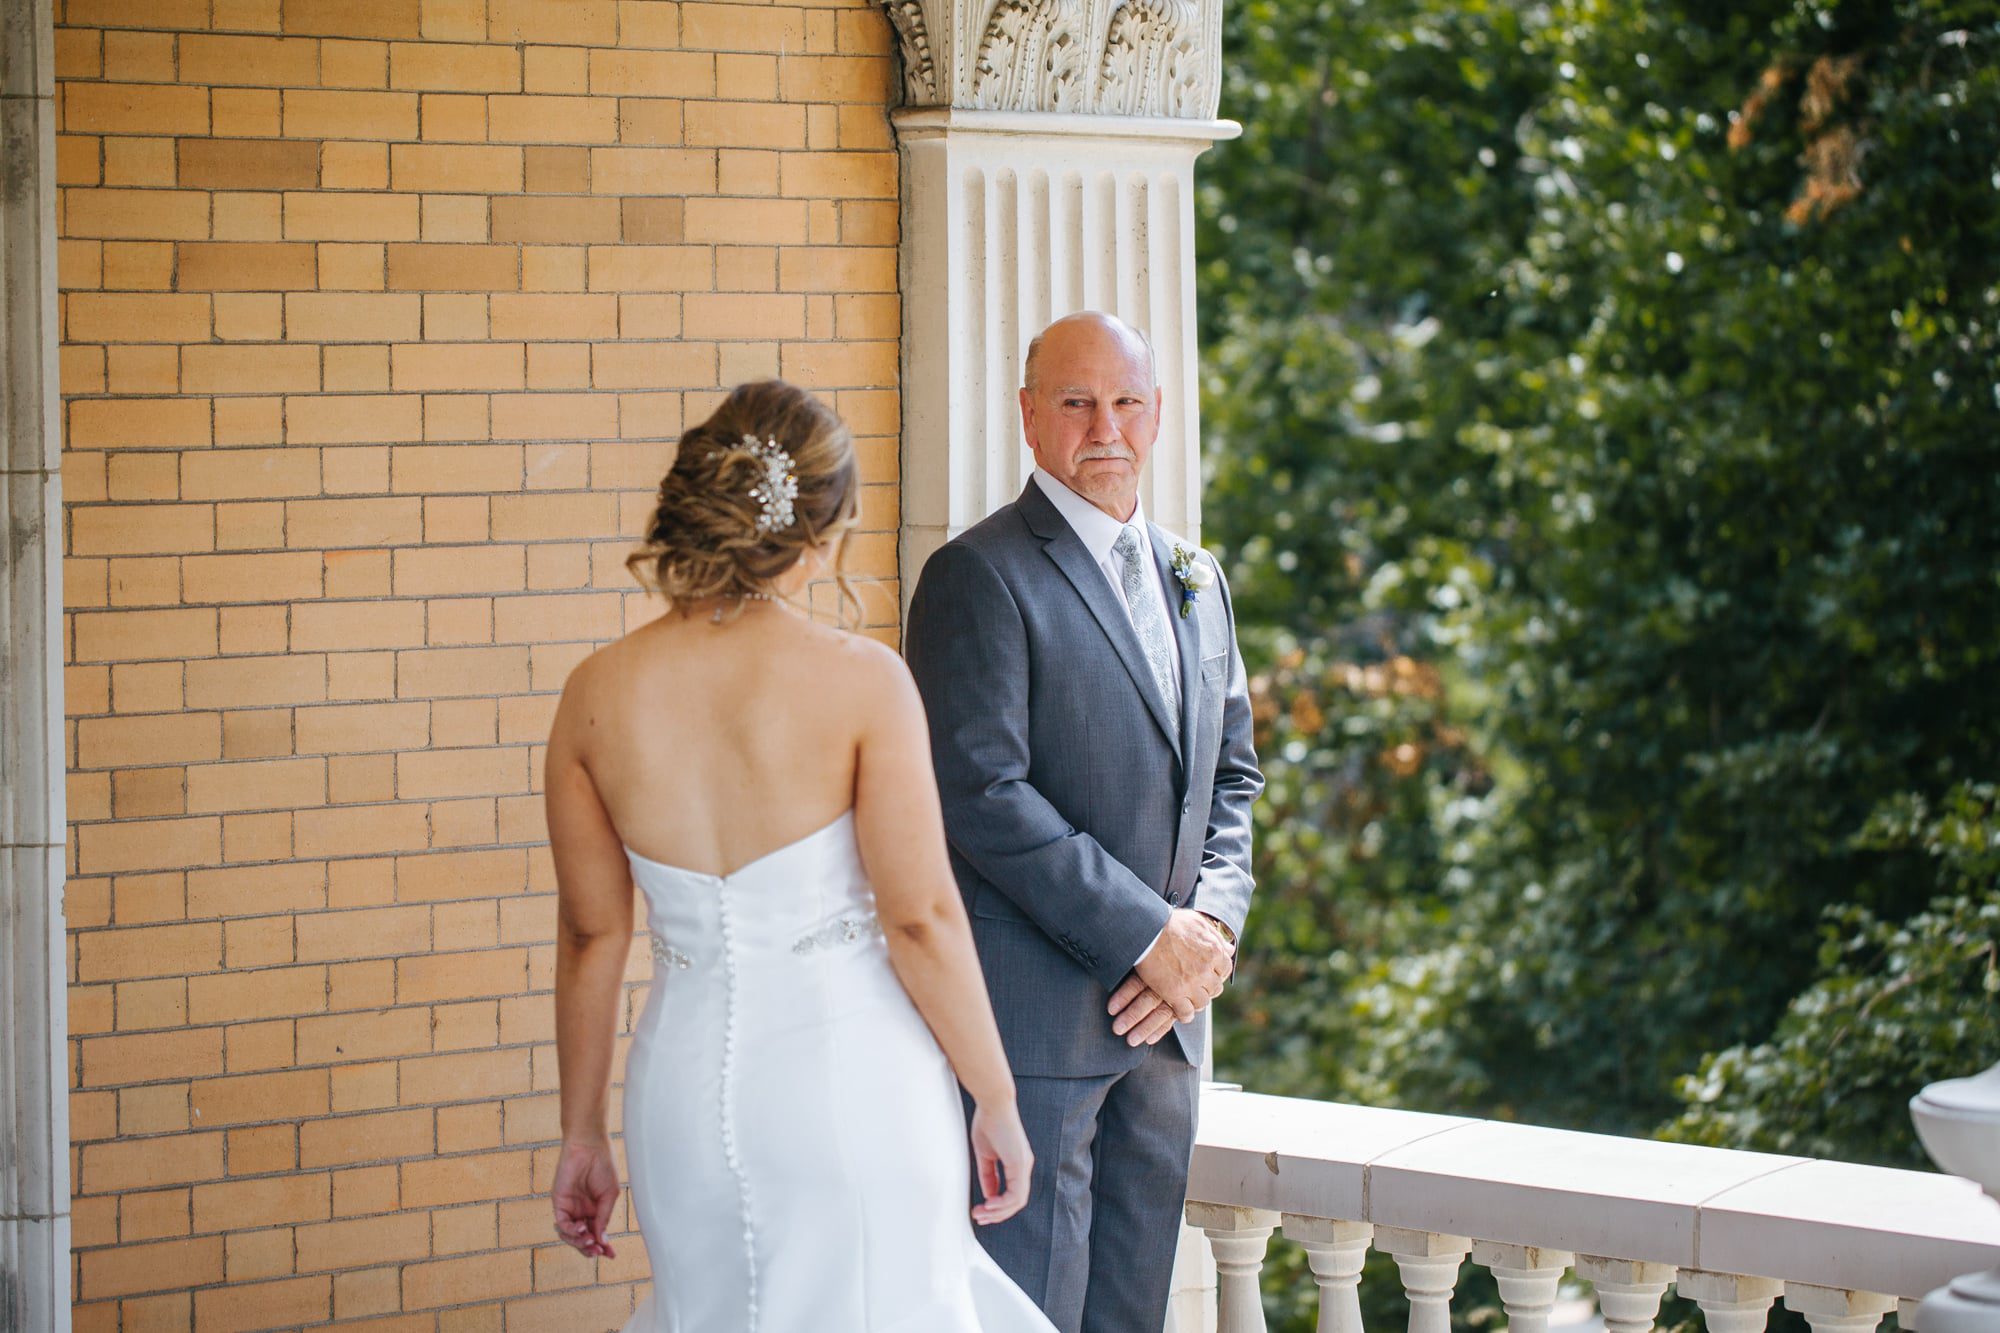 wedding first look, denver wedding, denver wedding photographer, first look locations, bride and dad first look, outdoor first look, should we do a first look wedding, first look pro con, dad daughter wedding first look